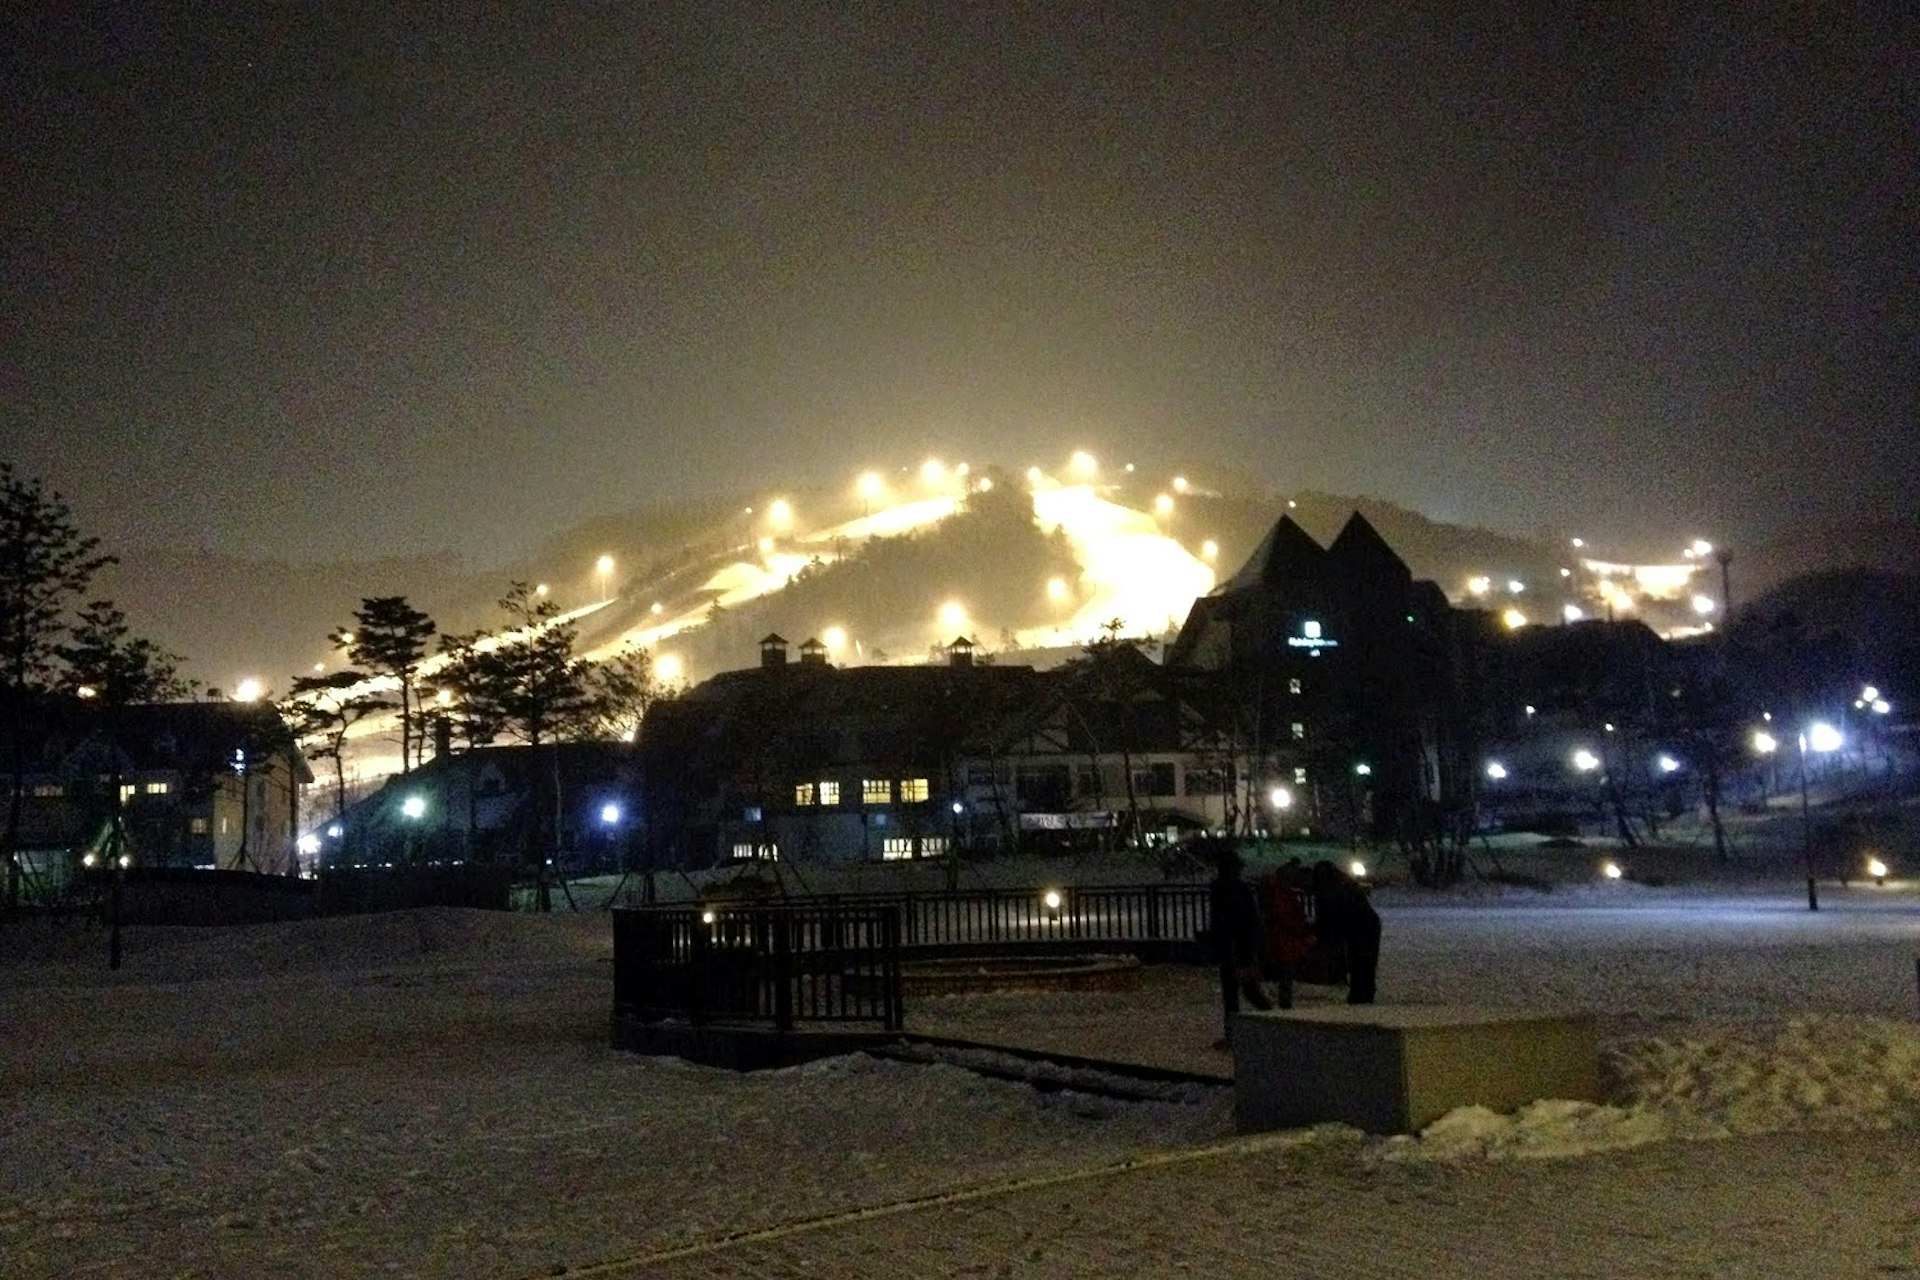 Night skiing at Alpensia, host of the 2018 Winter Olympics. Image by Megan Eaves / Lonely Planet